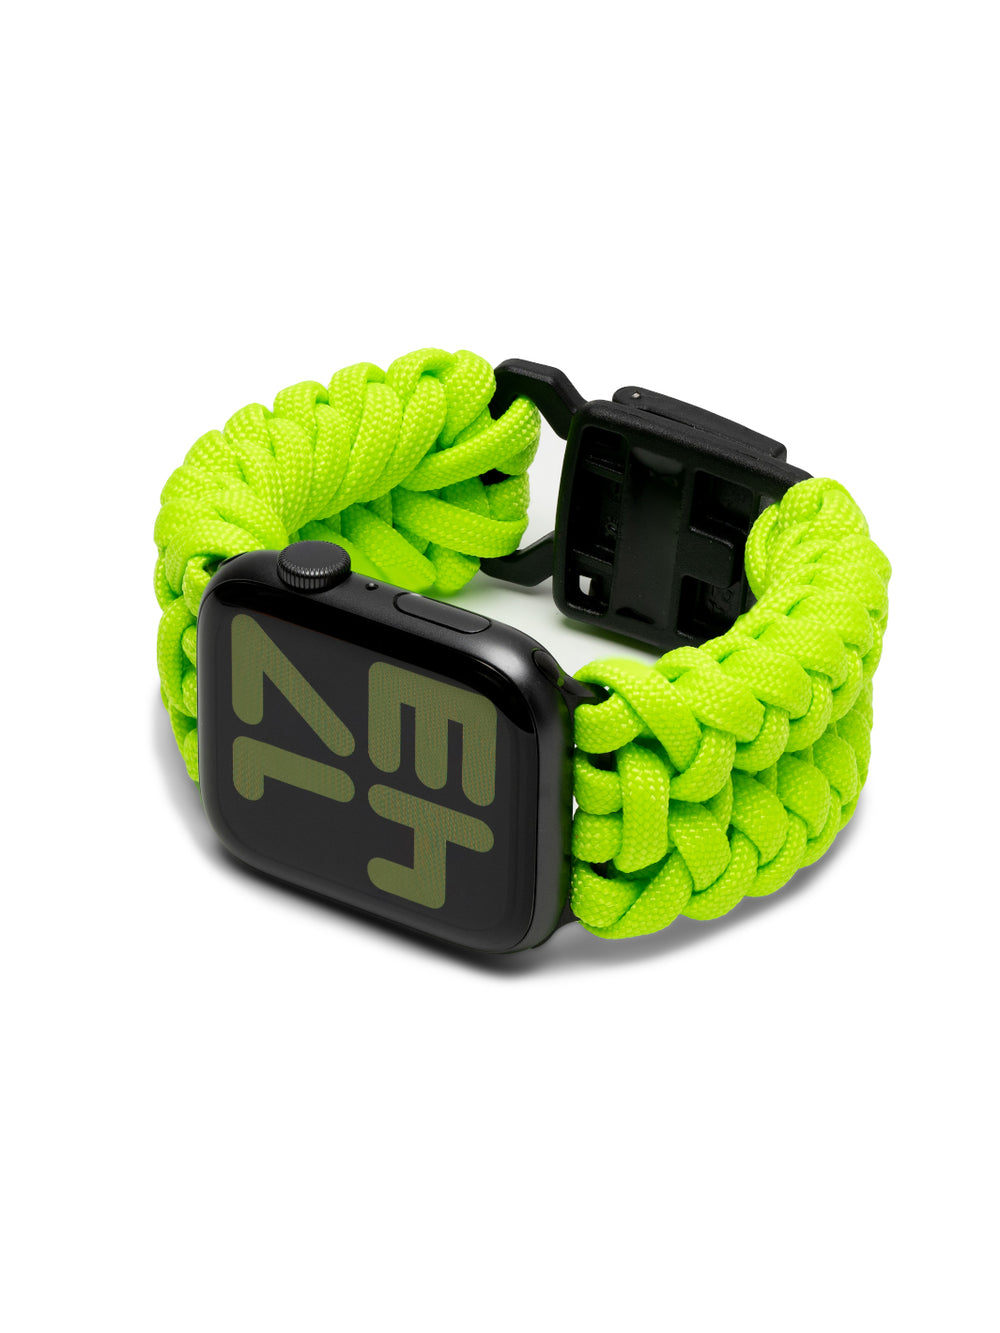 Strapcord Ribs Apple Watch Strap Article 009 Rave Green 2 1065 x 1420